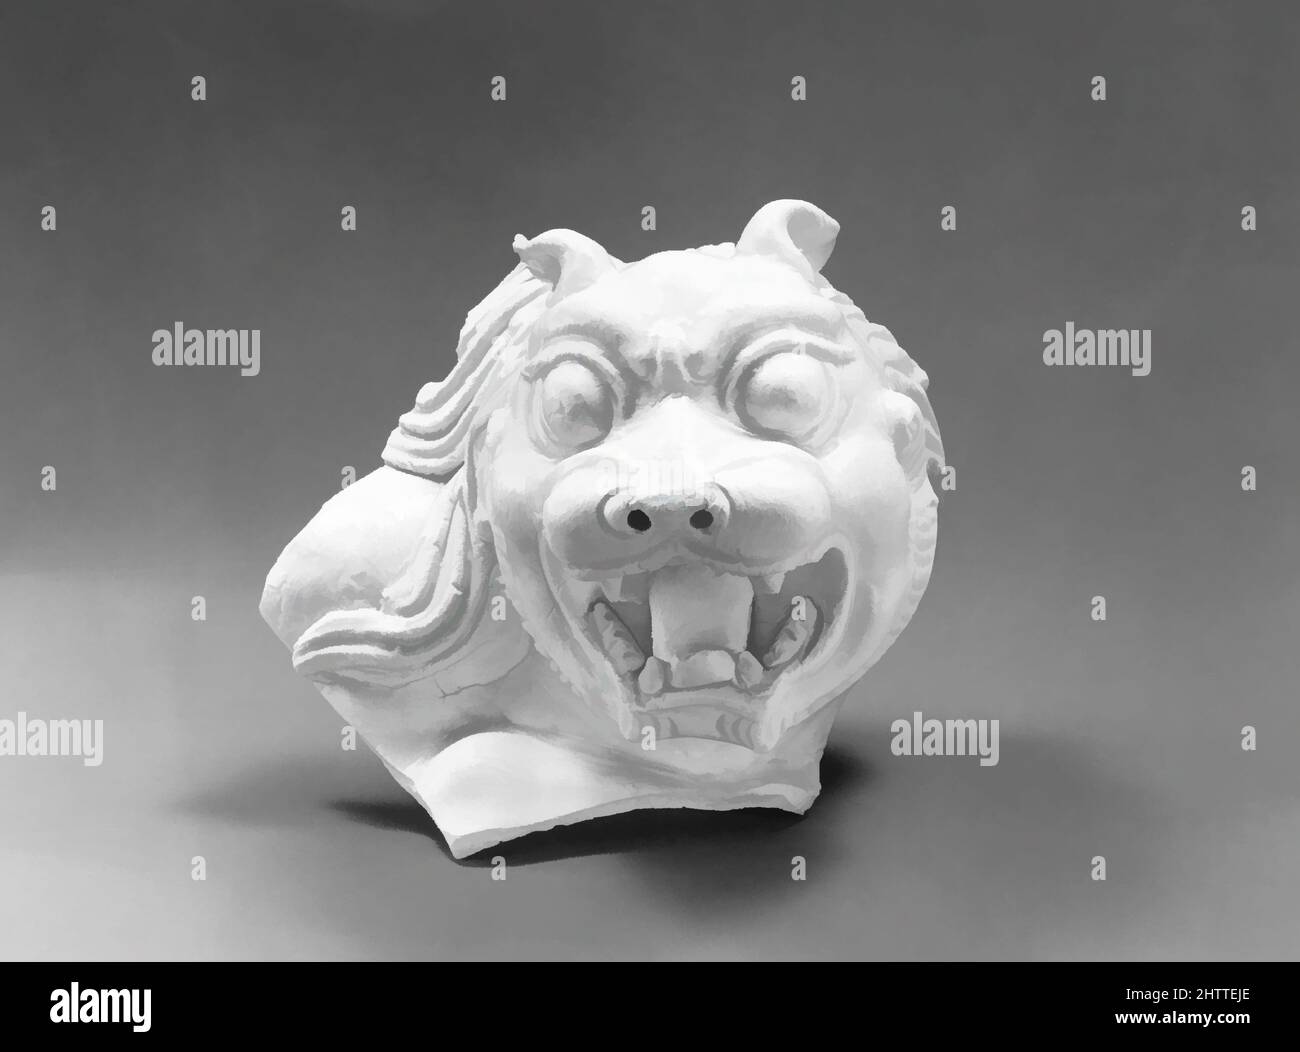 Art inspired by Head of a Lion, Northern Song dynasty (960–1127), 11th–12th century, China, Porcelain with ivory white glaze (Ding ware), H. 4 3/8 in. (11.1 cm); W. 4 7/8 in. (12.4 cm); D. 4 1/4 in. (10.8 cm), Ceramics, Classic works modernized by Artotop with a splash of modernity. Shapes, color and value, eye-catching visual impact on art. Emotions through freedom of artworks in a contemporary way. A timeless message pursuing a wildly creative new direction. Artists turning to the digital medium and creating the Artotop NFT Stock Photo